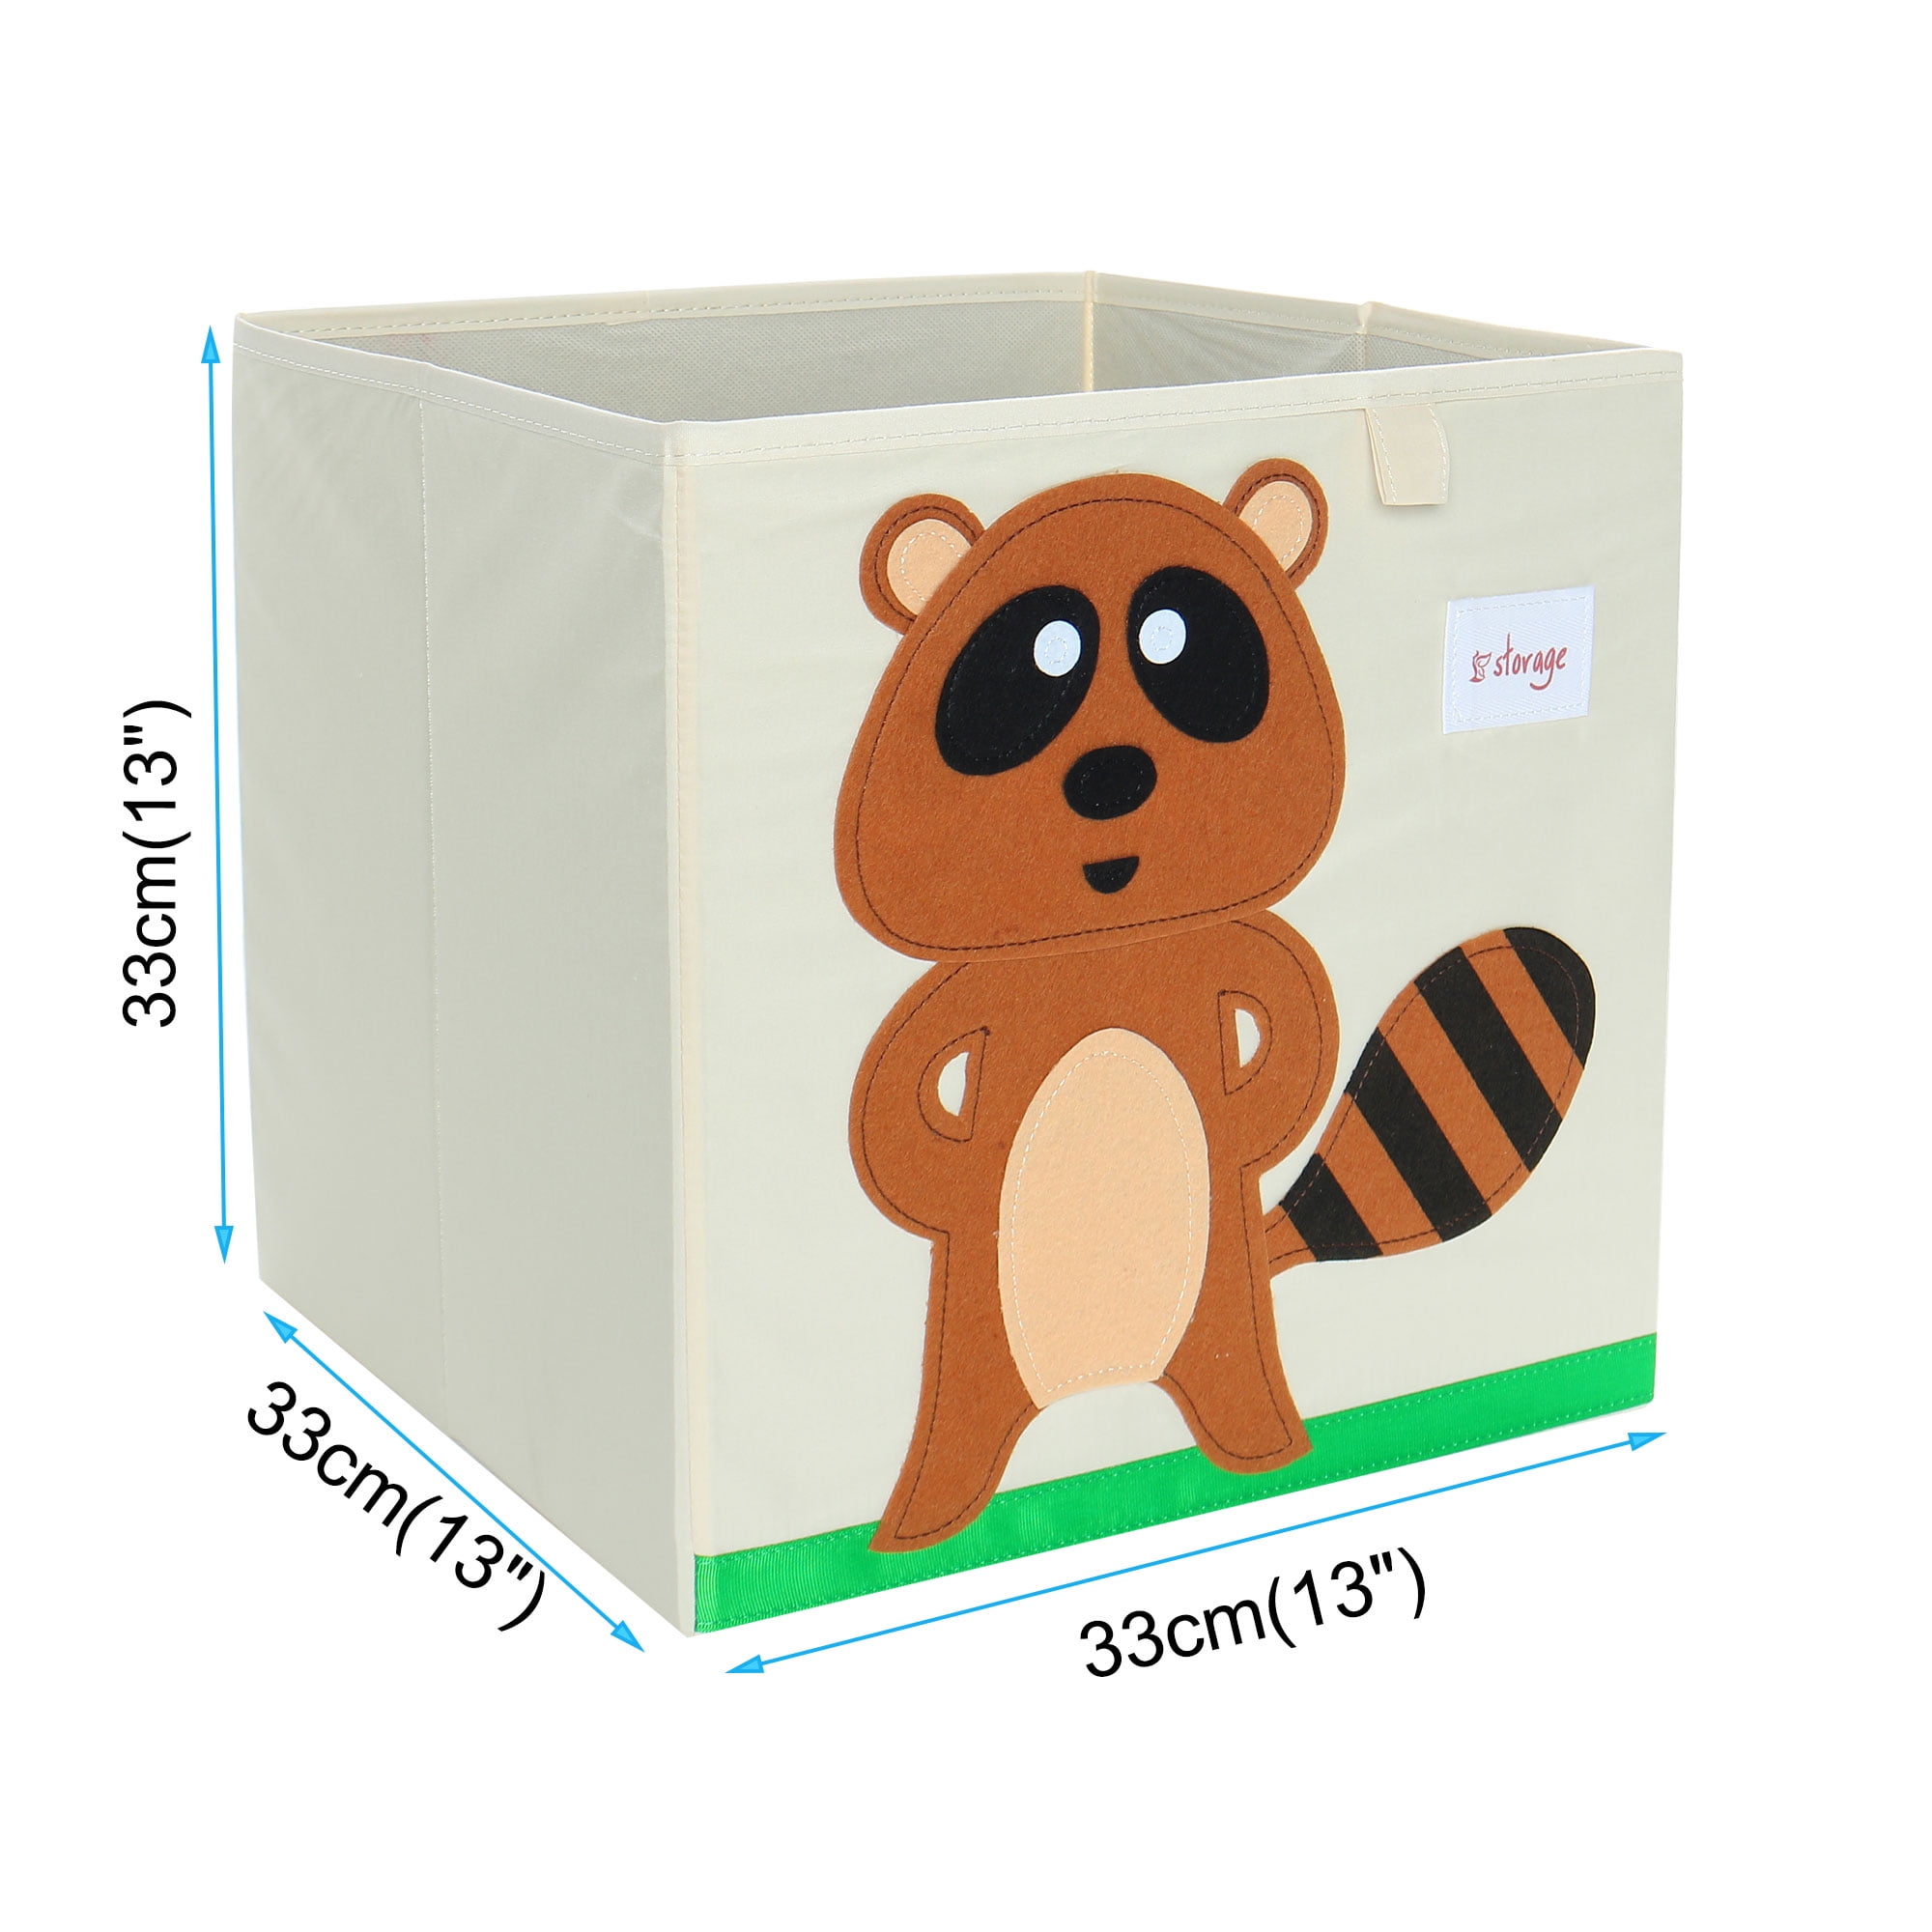 Details about   Square Foldable Canvas Storage Collapsible Folding Box Fabric Kids Cubes Toys UK 